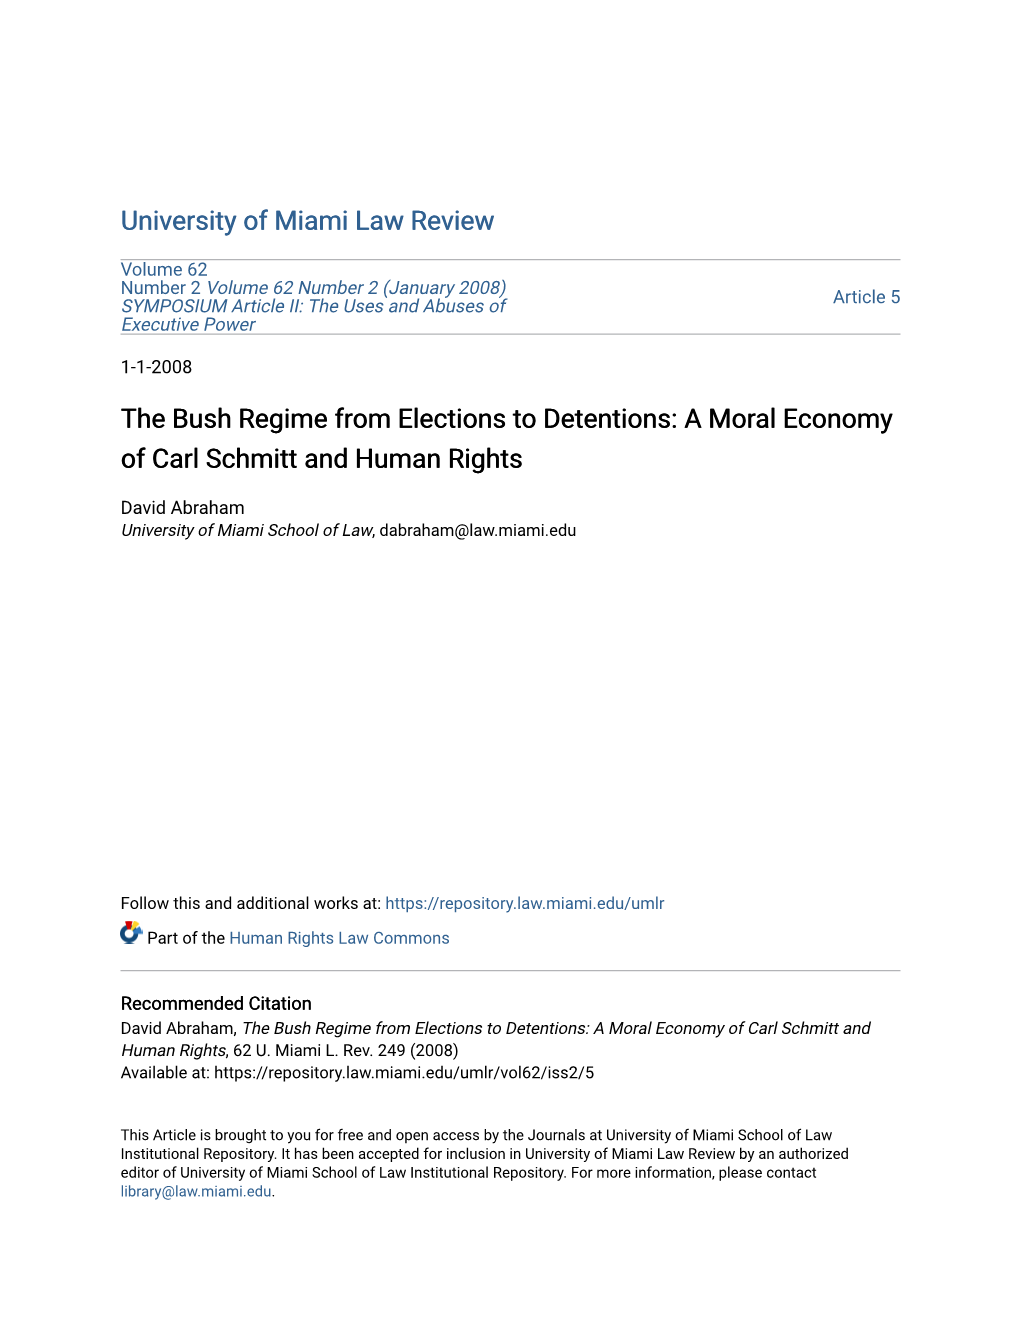 The Bush Regime from Elections to Detentions: a Moral Economy of Carl Schmitt and Human Rights